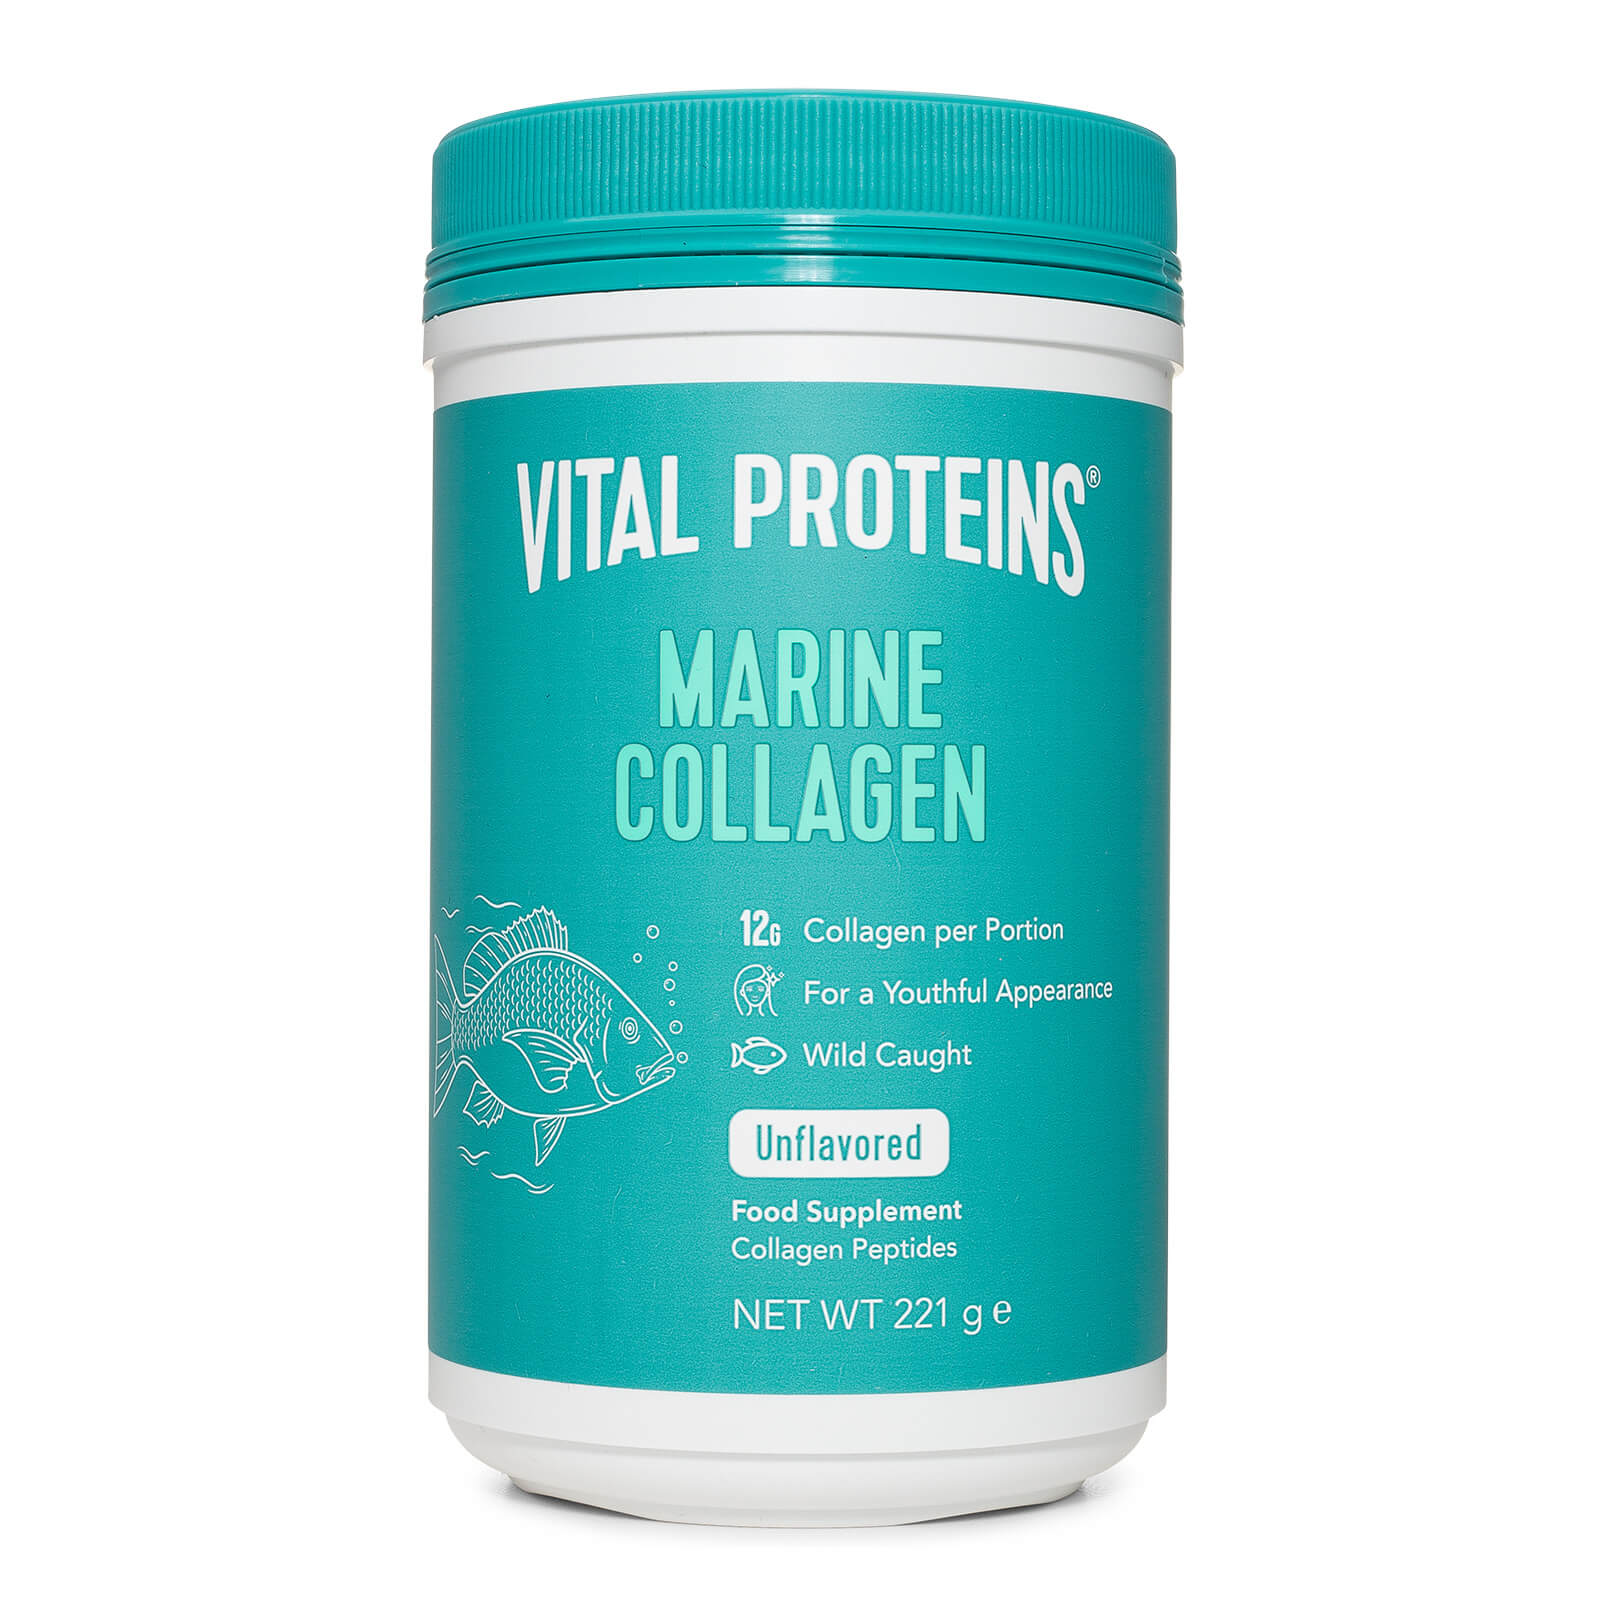 Marine Collagen - 7oz Subscription - Delivery Every 4 Months